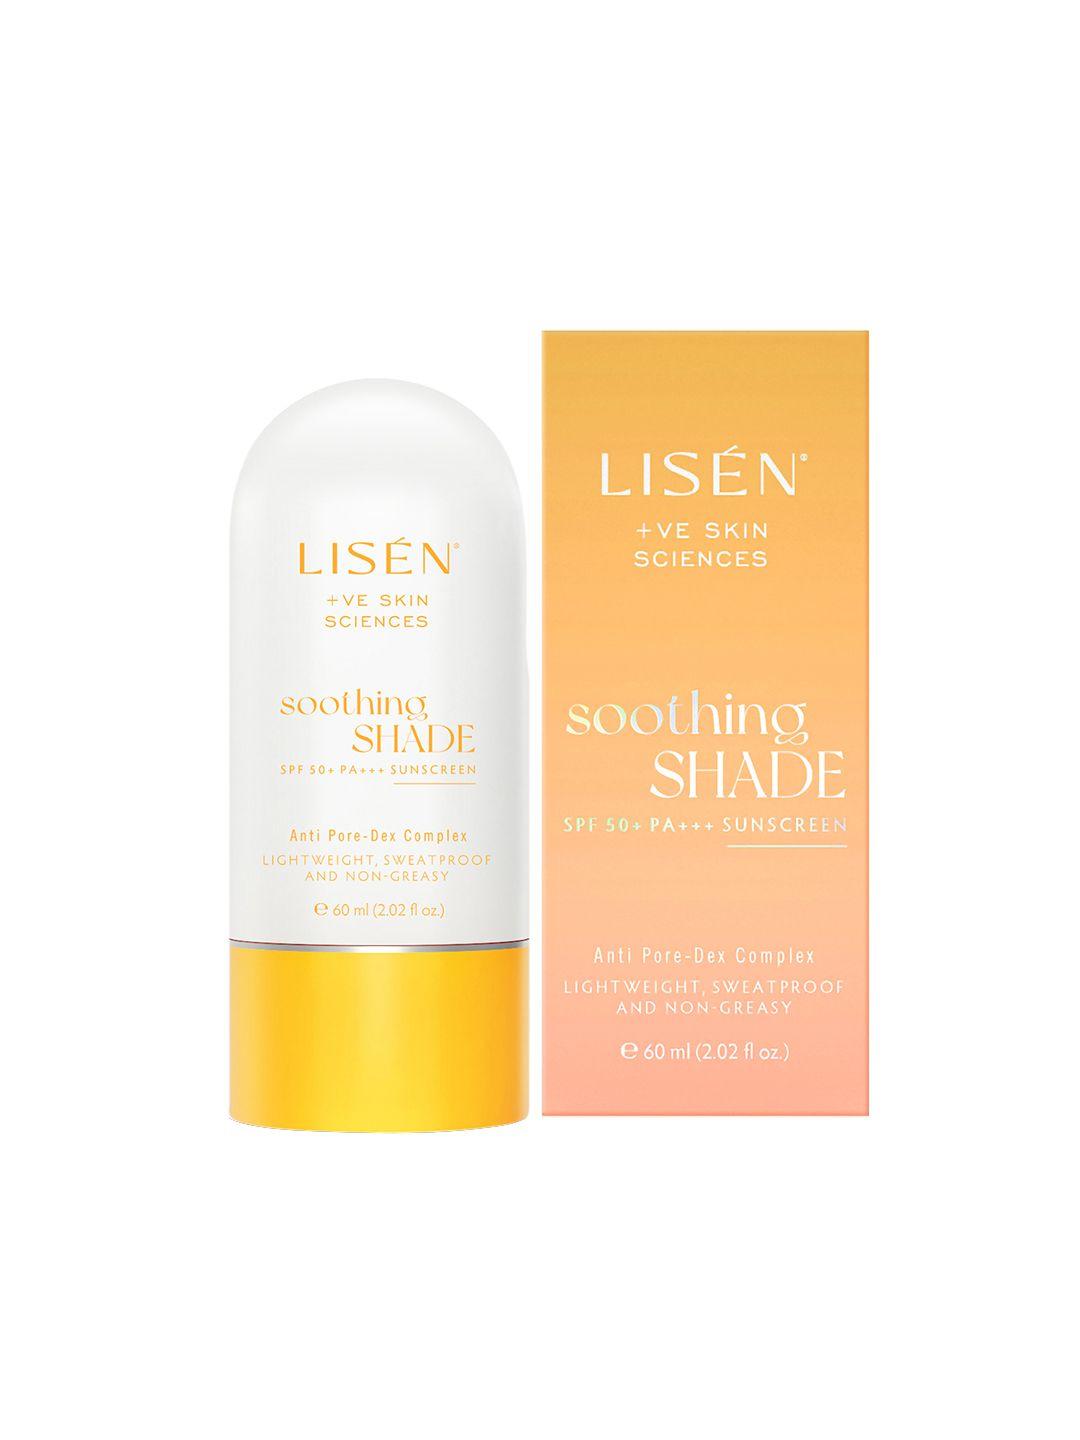 lisen soothing shade spf 50 + pa +++ sunscreen lightweight sweat-proof & non-greasy 60 ml